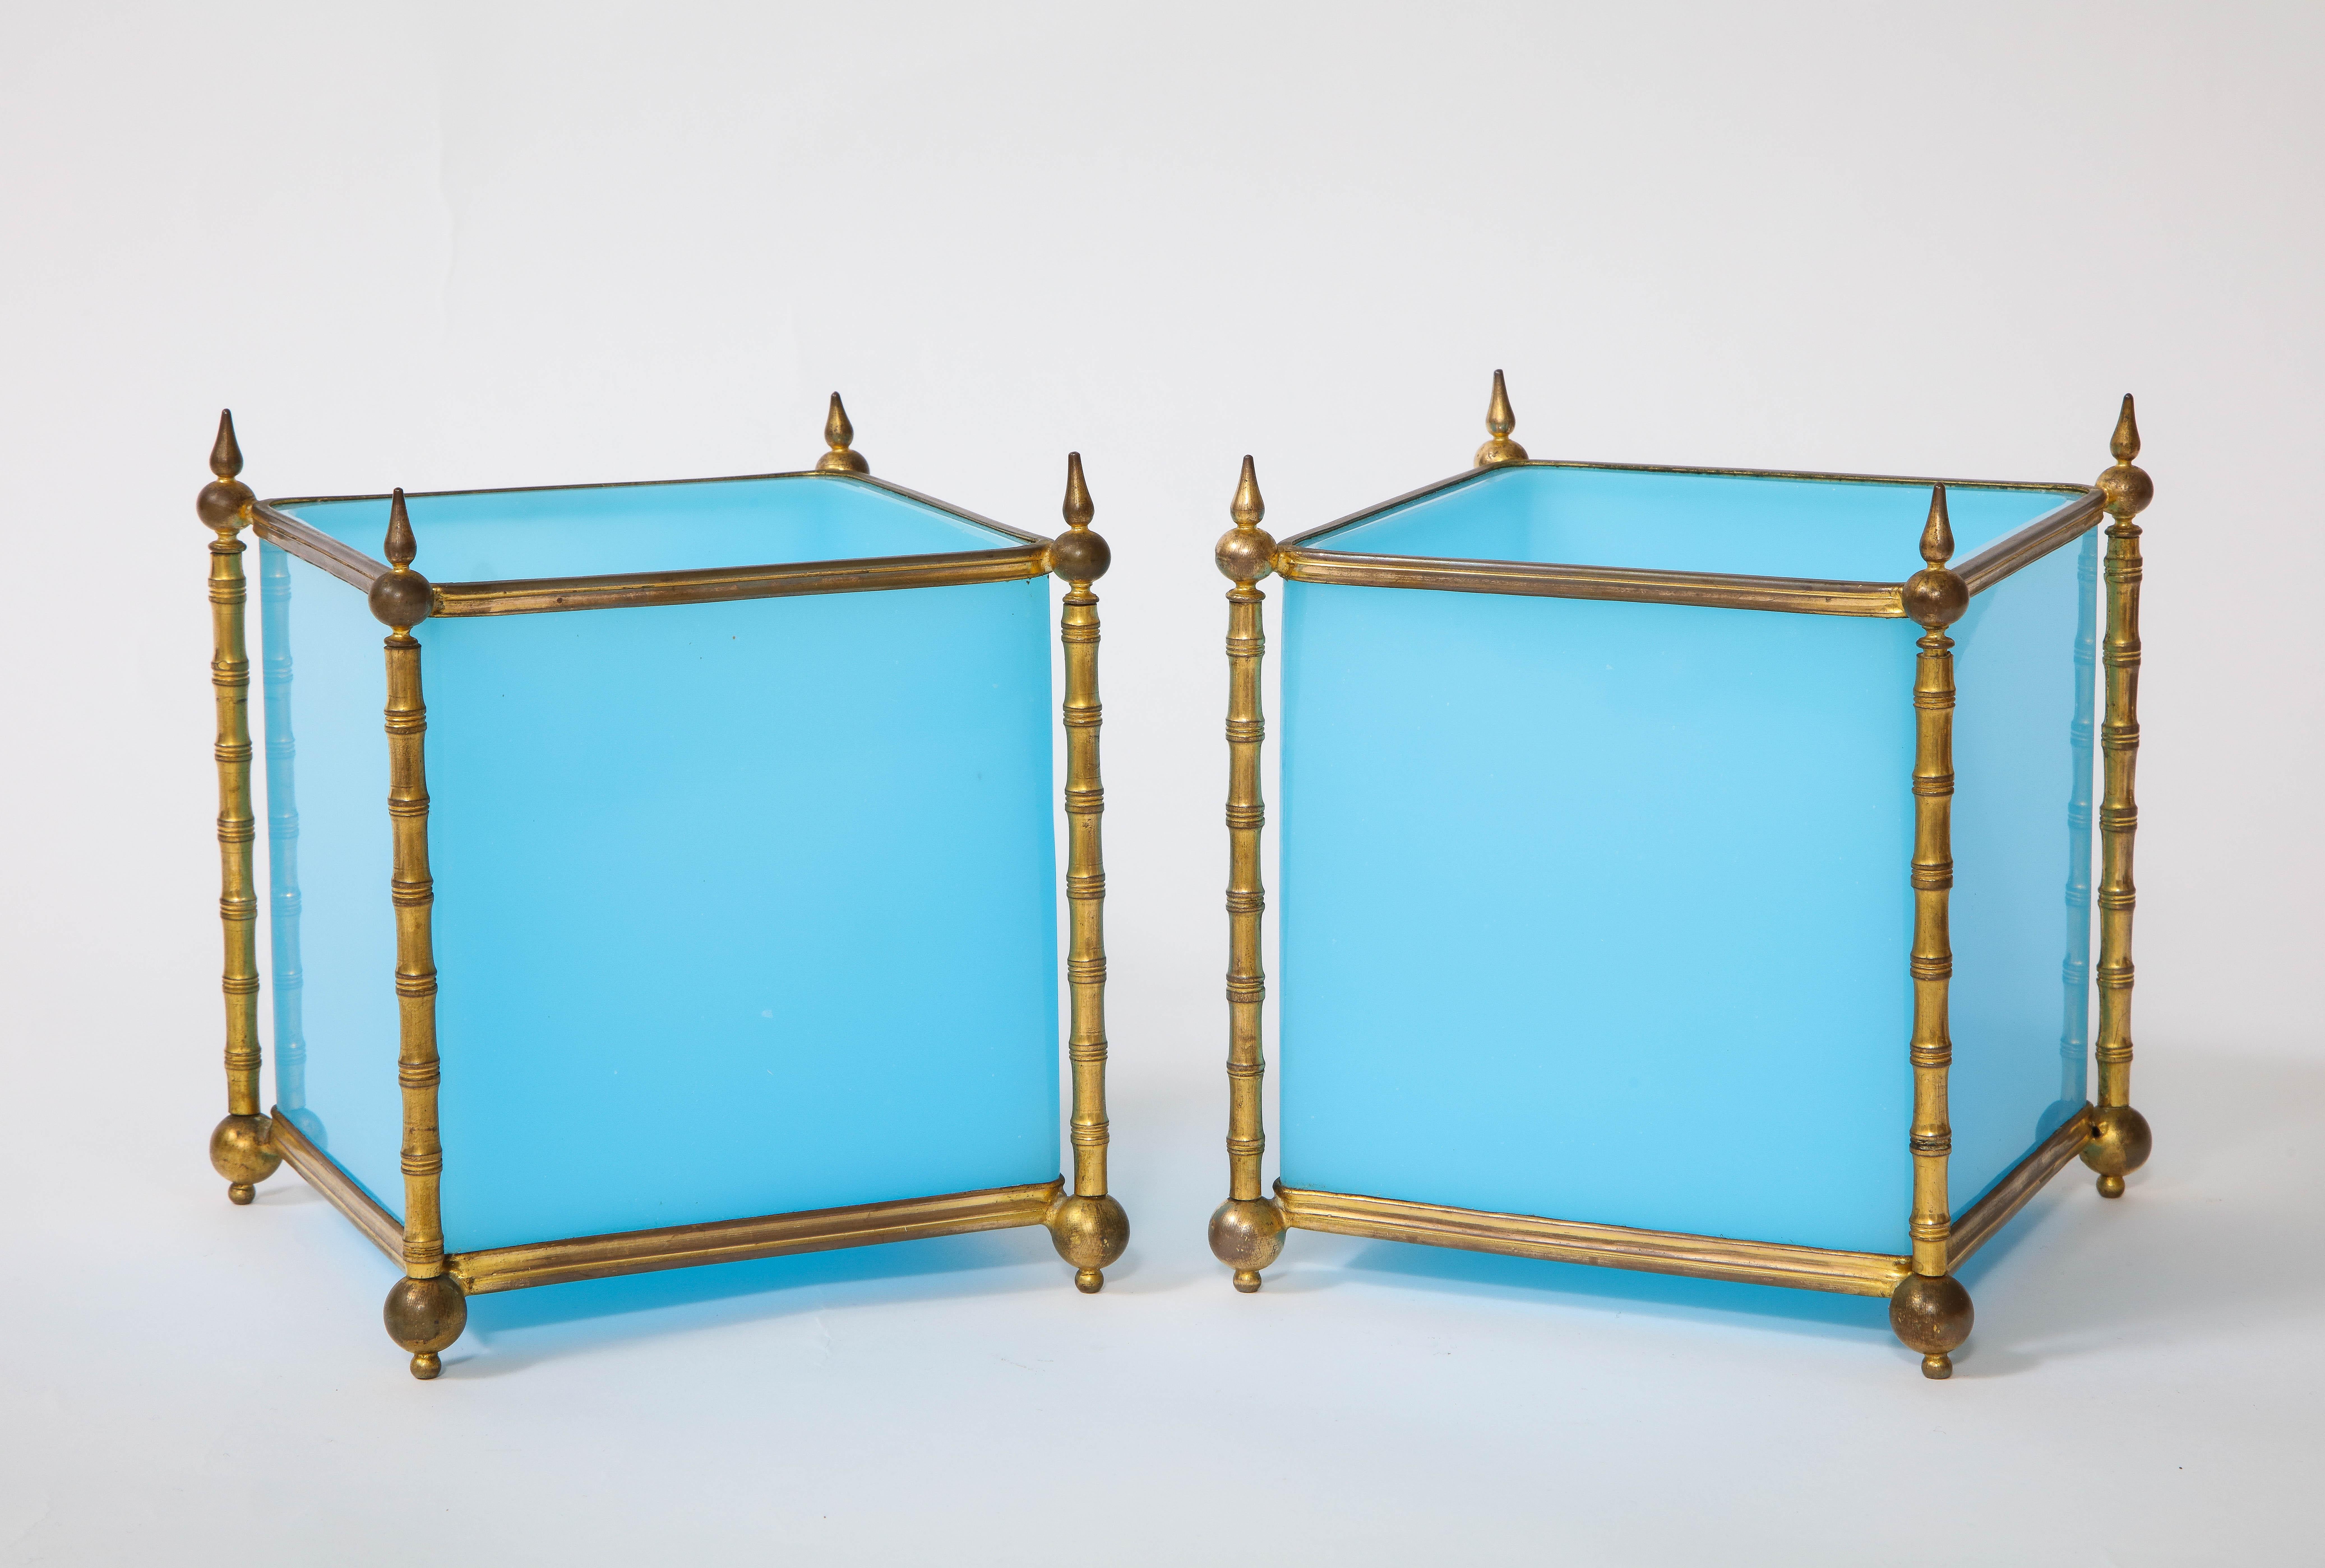 An exquisite and highly decorative pair turquoise Opaline French baccarat crystal ormolu mounted jardinière/cache pots, each cashepot beautifully hand polished and then mounted in doré bronze bamboo mounts, attributed to baccarat crystal, Paris,